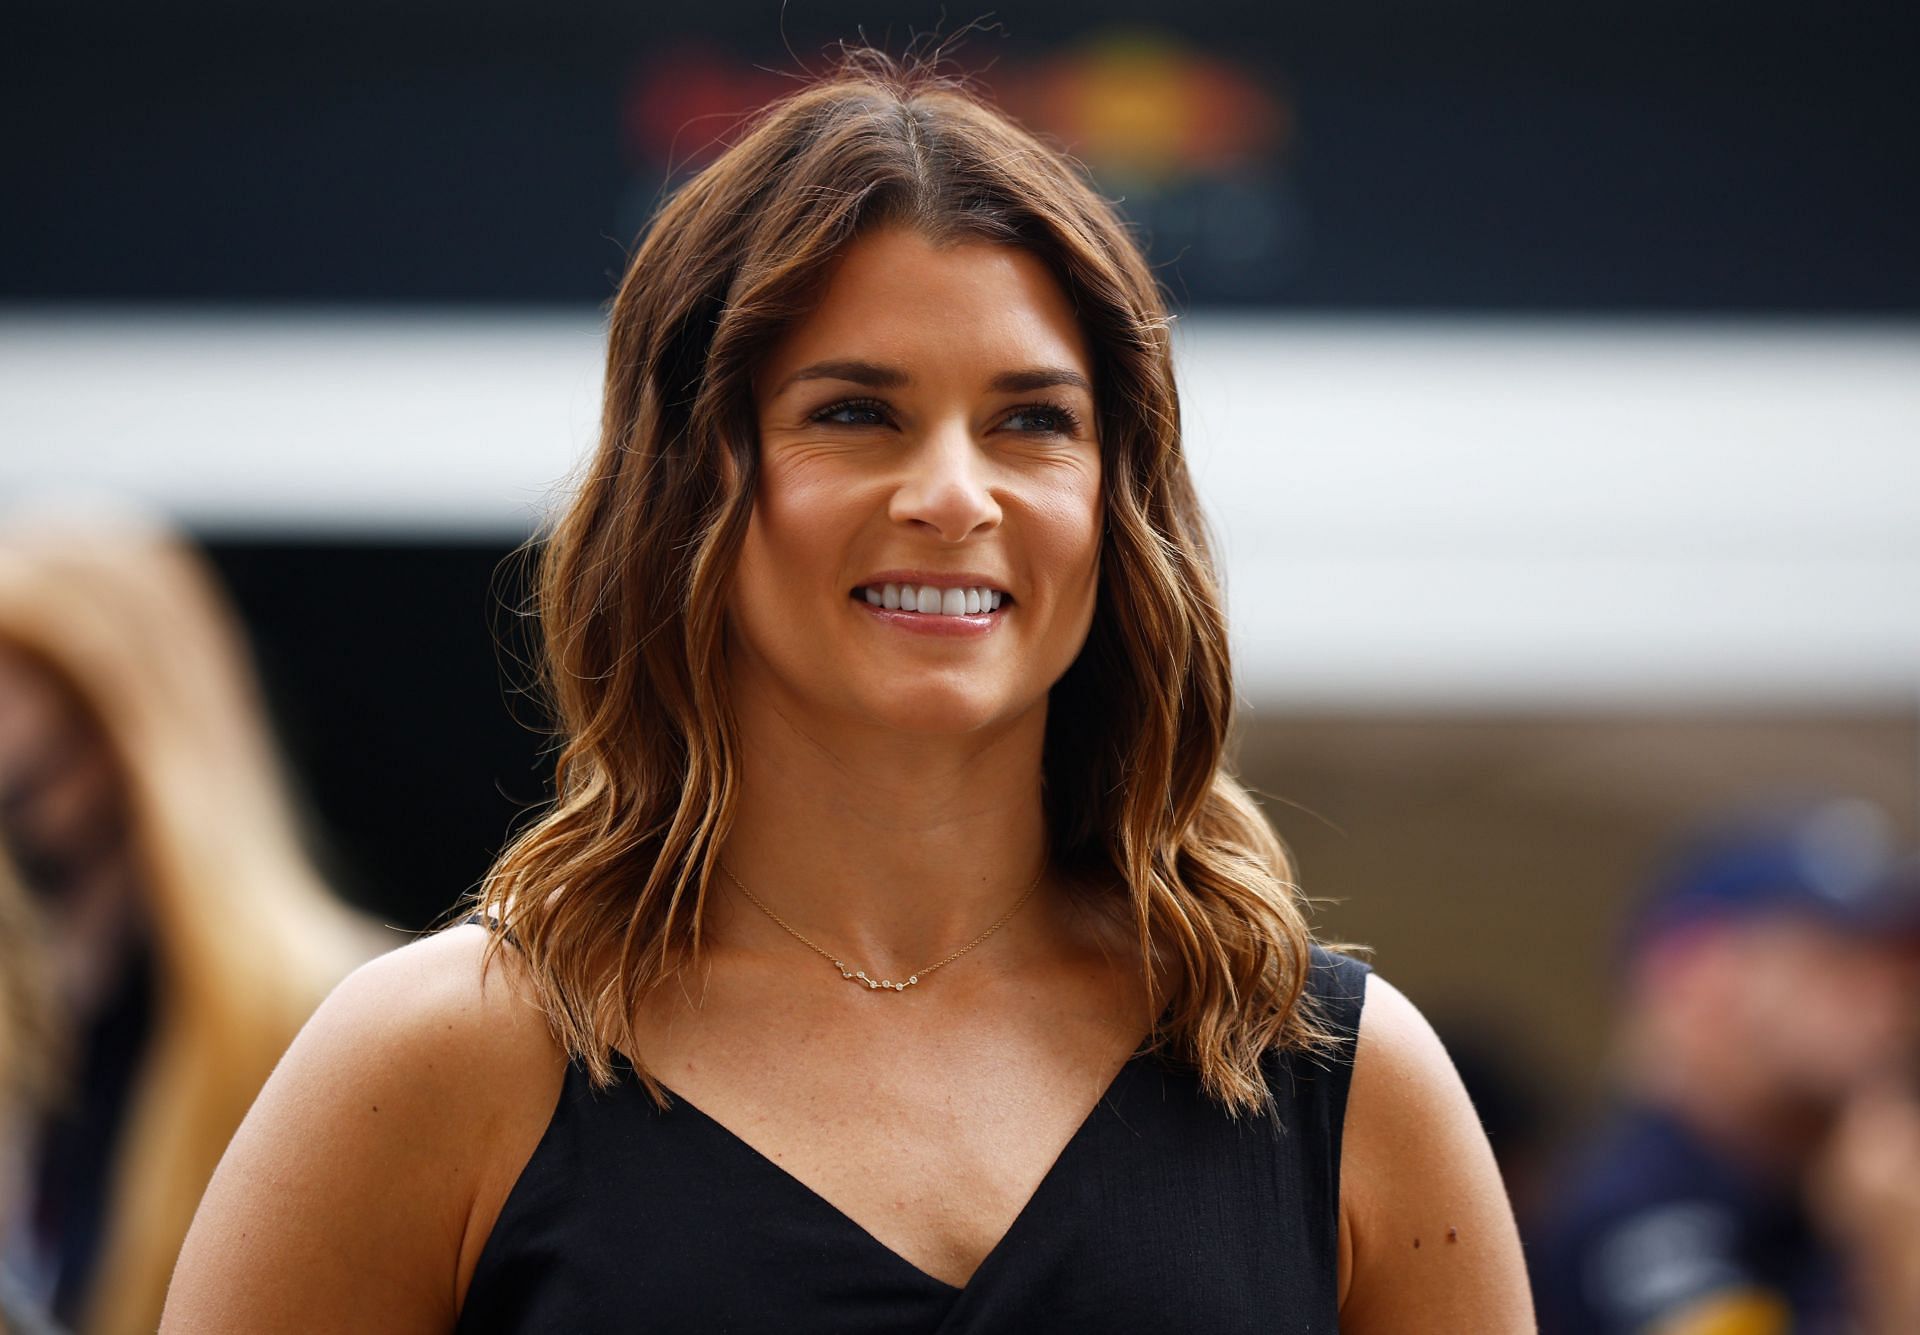 Danica Patrick looks on in the Paddock before the 2021 F1 US Grand Prix at the Circuit of the Americas in Austin, Texas (Photo by Jared C. Tilton/Getty Images)